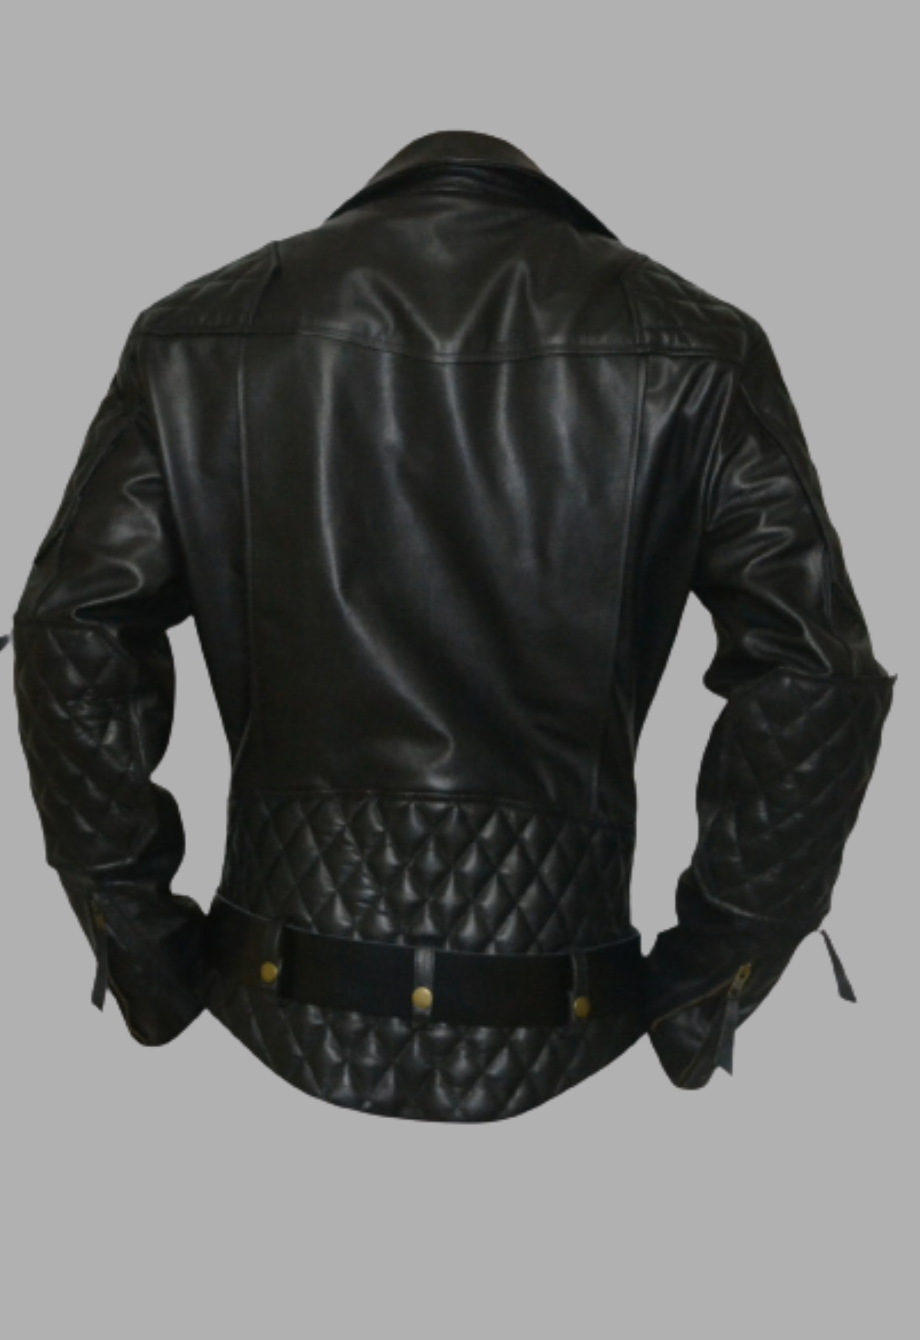 Columbia Motorbike Quilted Biker Leather Jacket